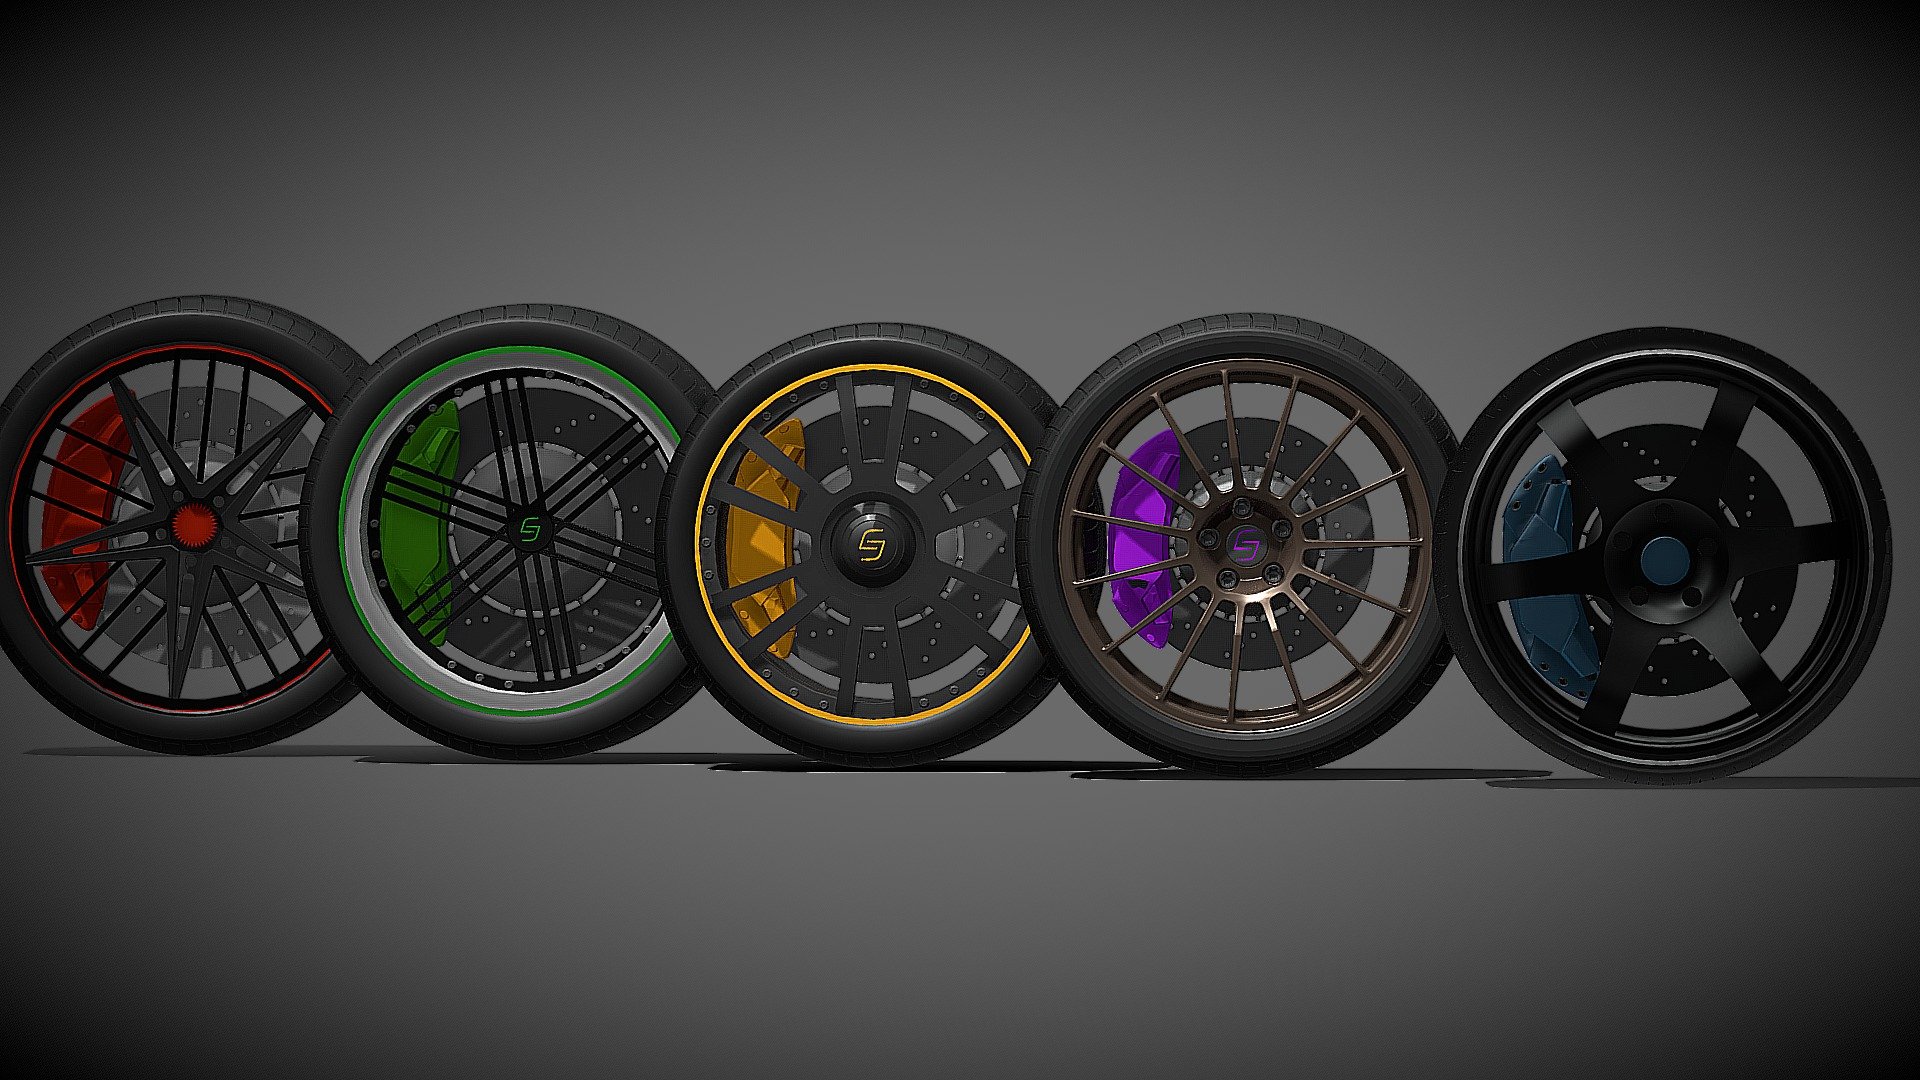 5 Wheels Sport for tuning by SDC with blender 2.81 - ( FREE ) 5 Wheels Sport for tuning car - Download Free 3D model by SDC PERFORMANCE™️ (@3Duae) 3d model